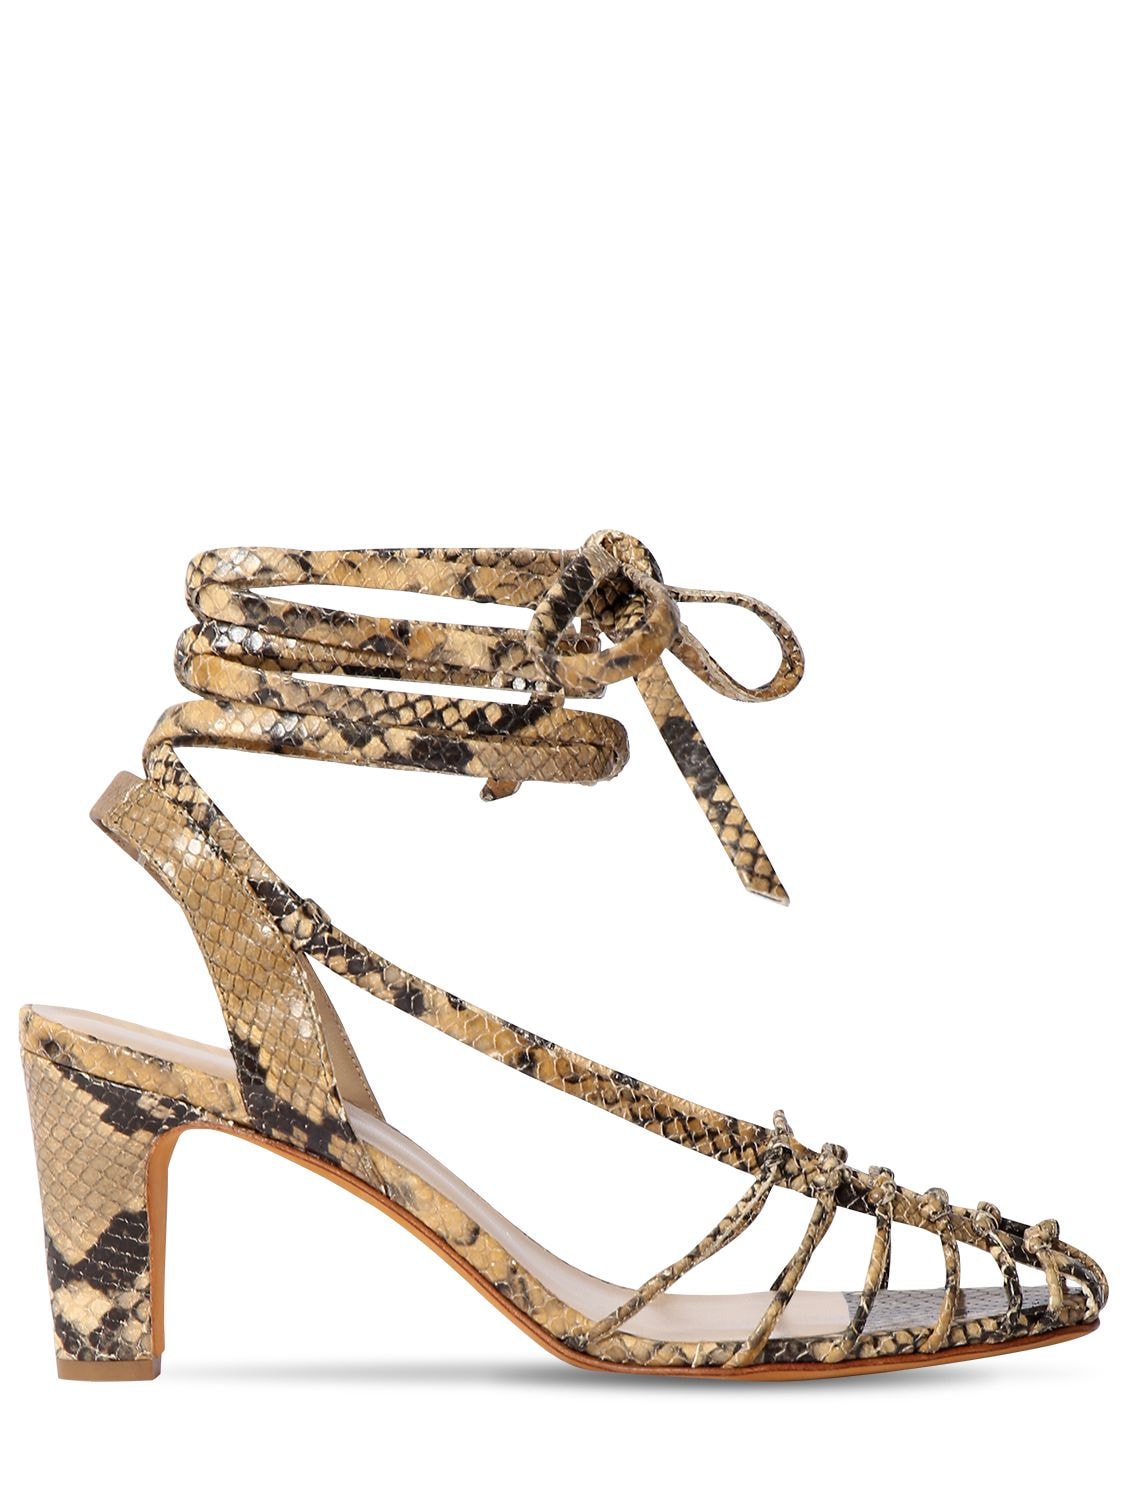 MARYAM NASSIR ZADEH 90MM SNAKE PRINTED LEATHER SANDALS,71ICD8001-MJC5IFZJUEVS0